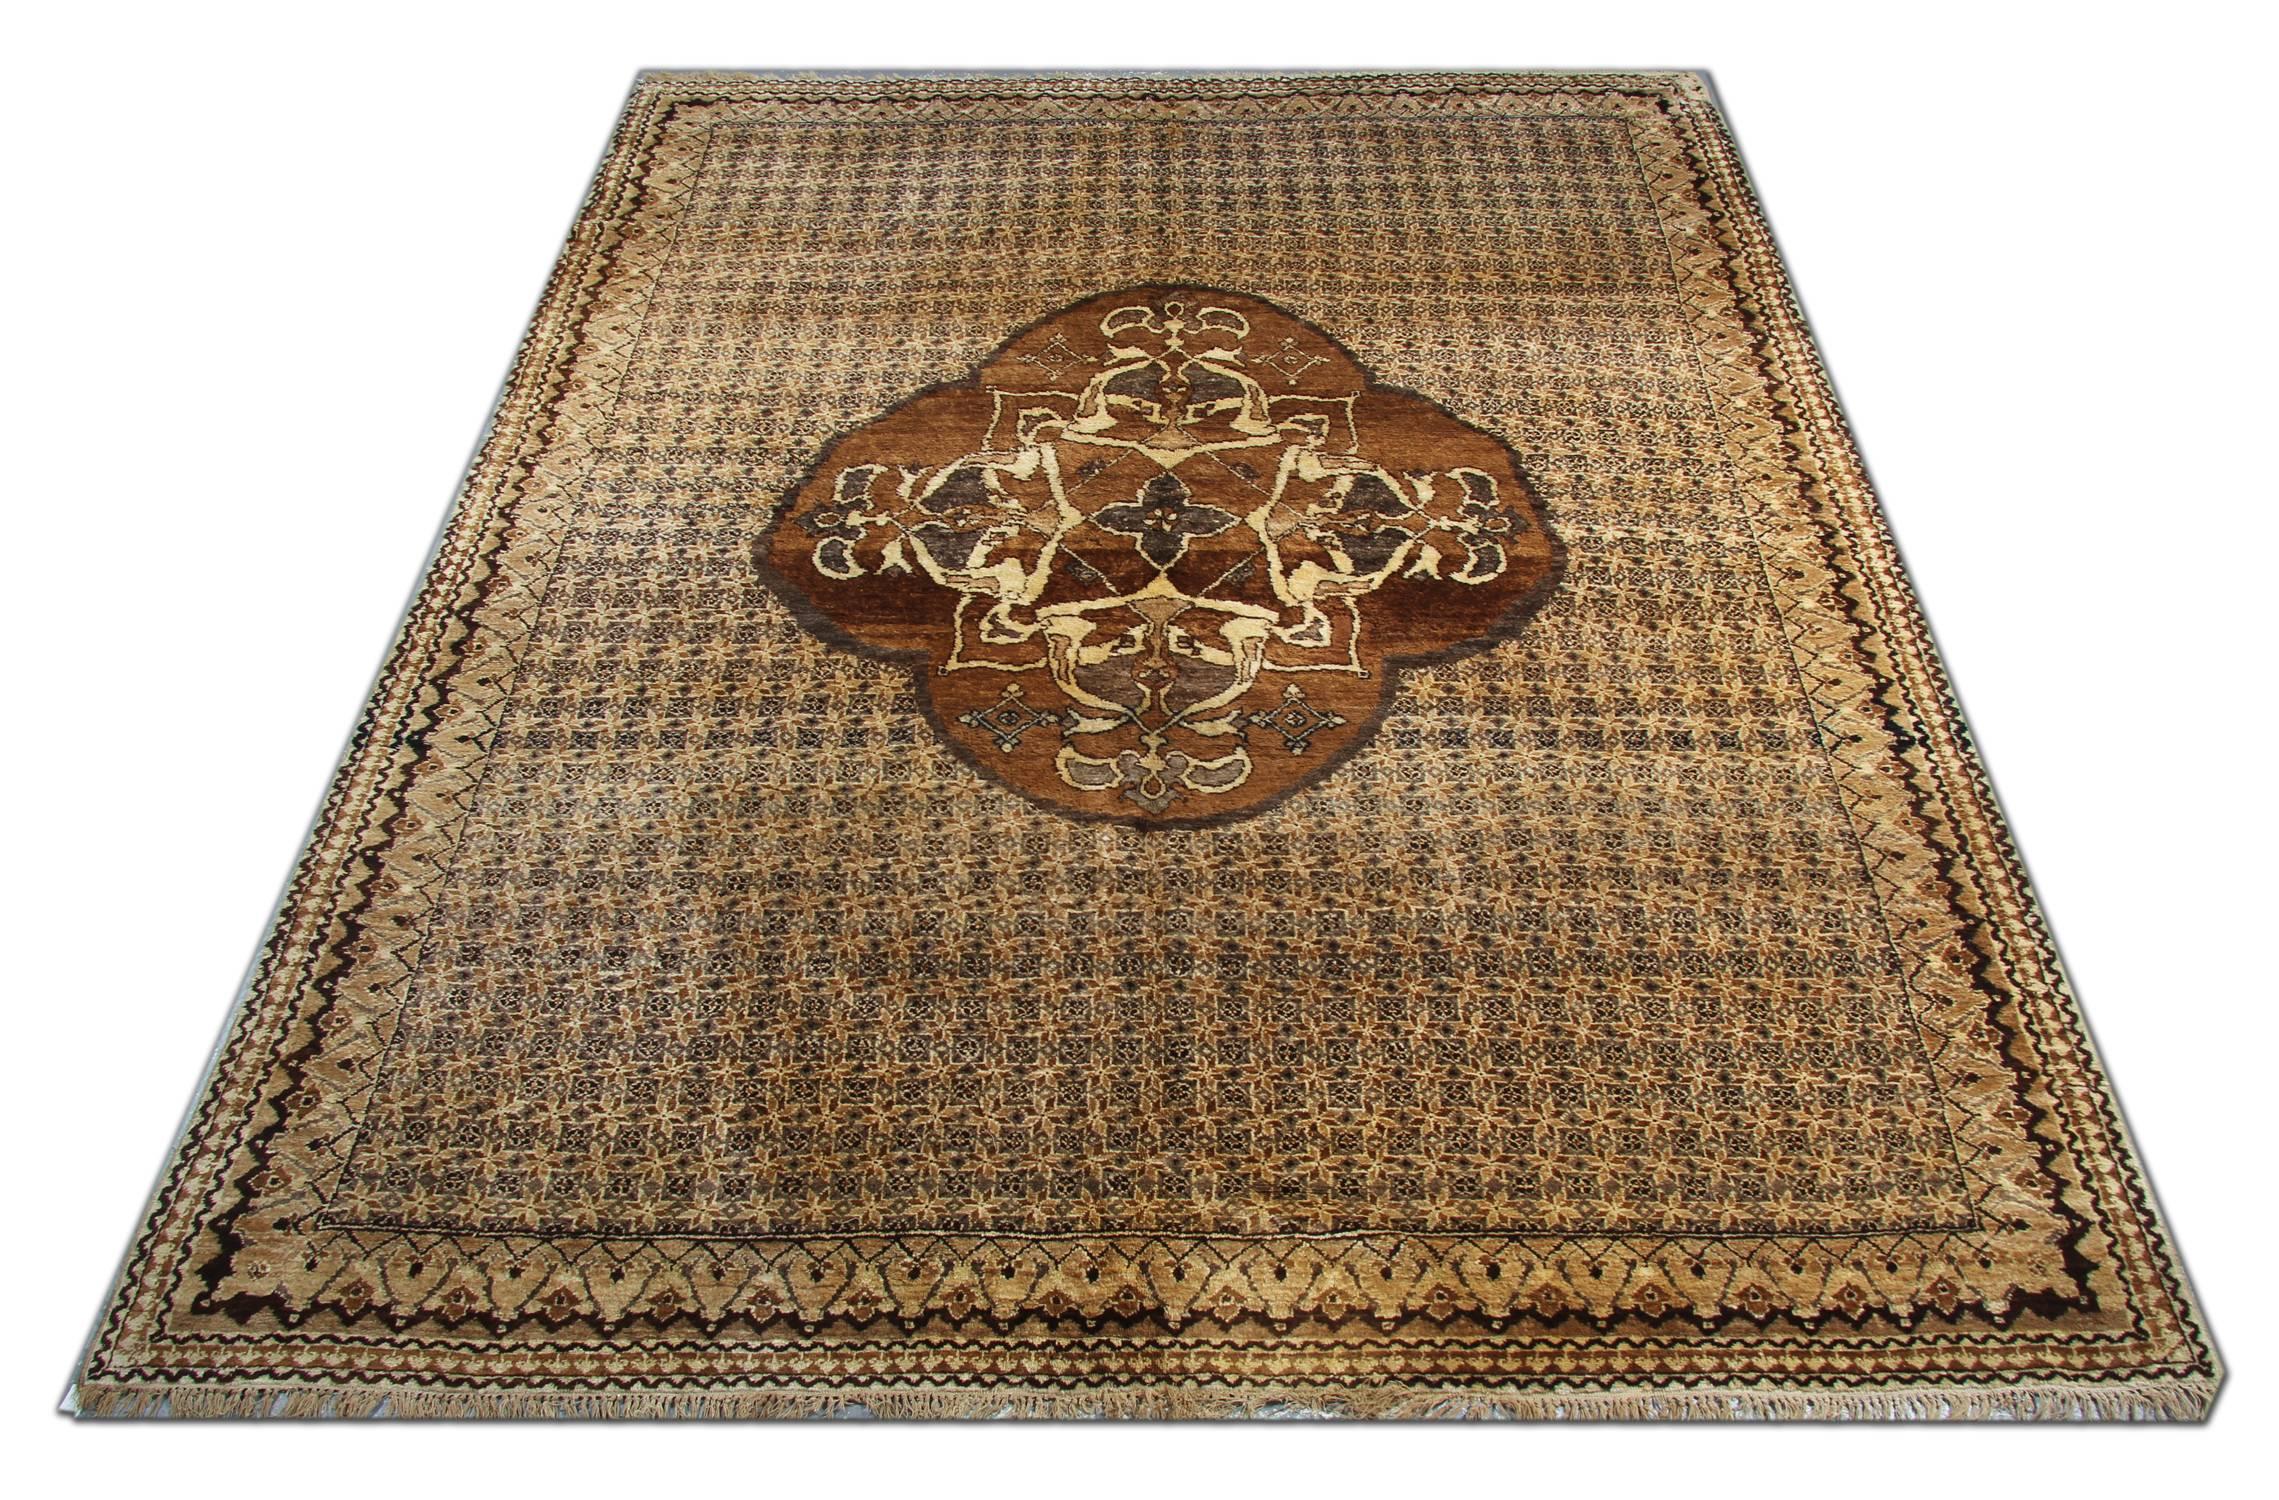 This handmade Kayseri Rug, circa 1970s carpet antique rug is a Turkish brown rug with central medallion and lights brown background color. These luxury rugs would complement your home as floor rugs. These large rugs look beautiful and would stand